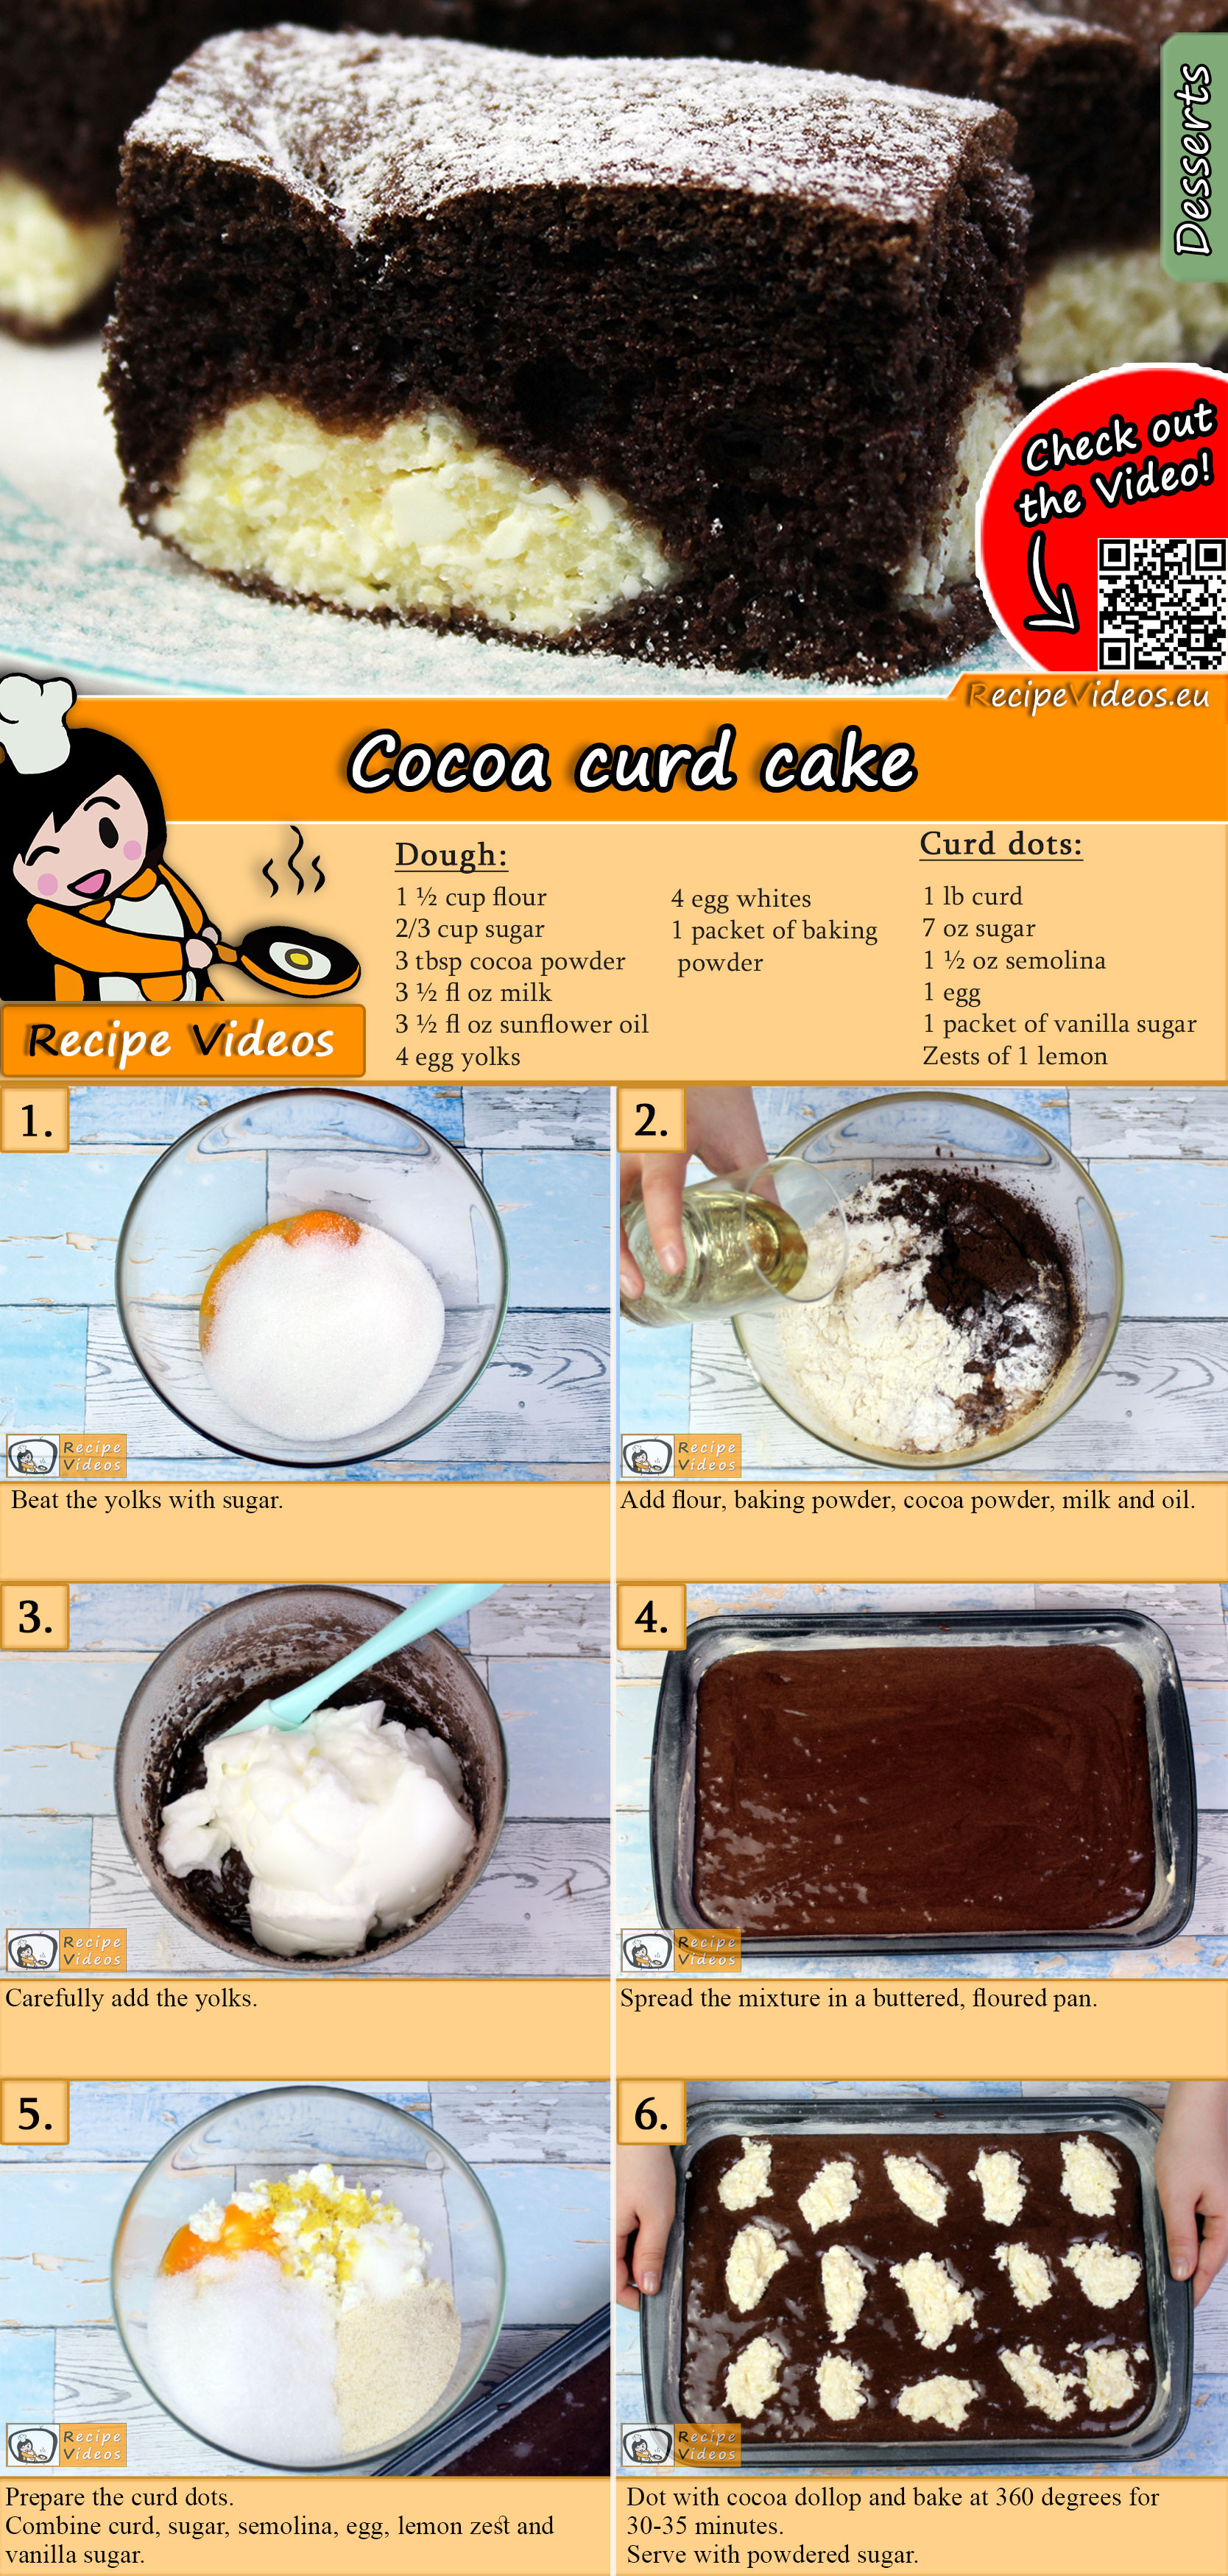 Cocoa curd cake recipe with video